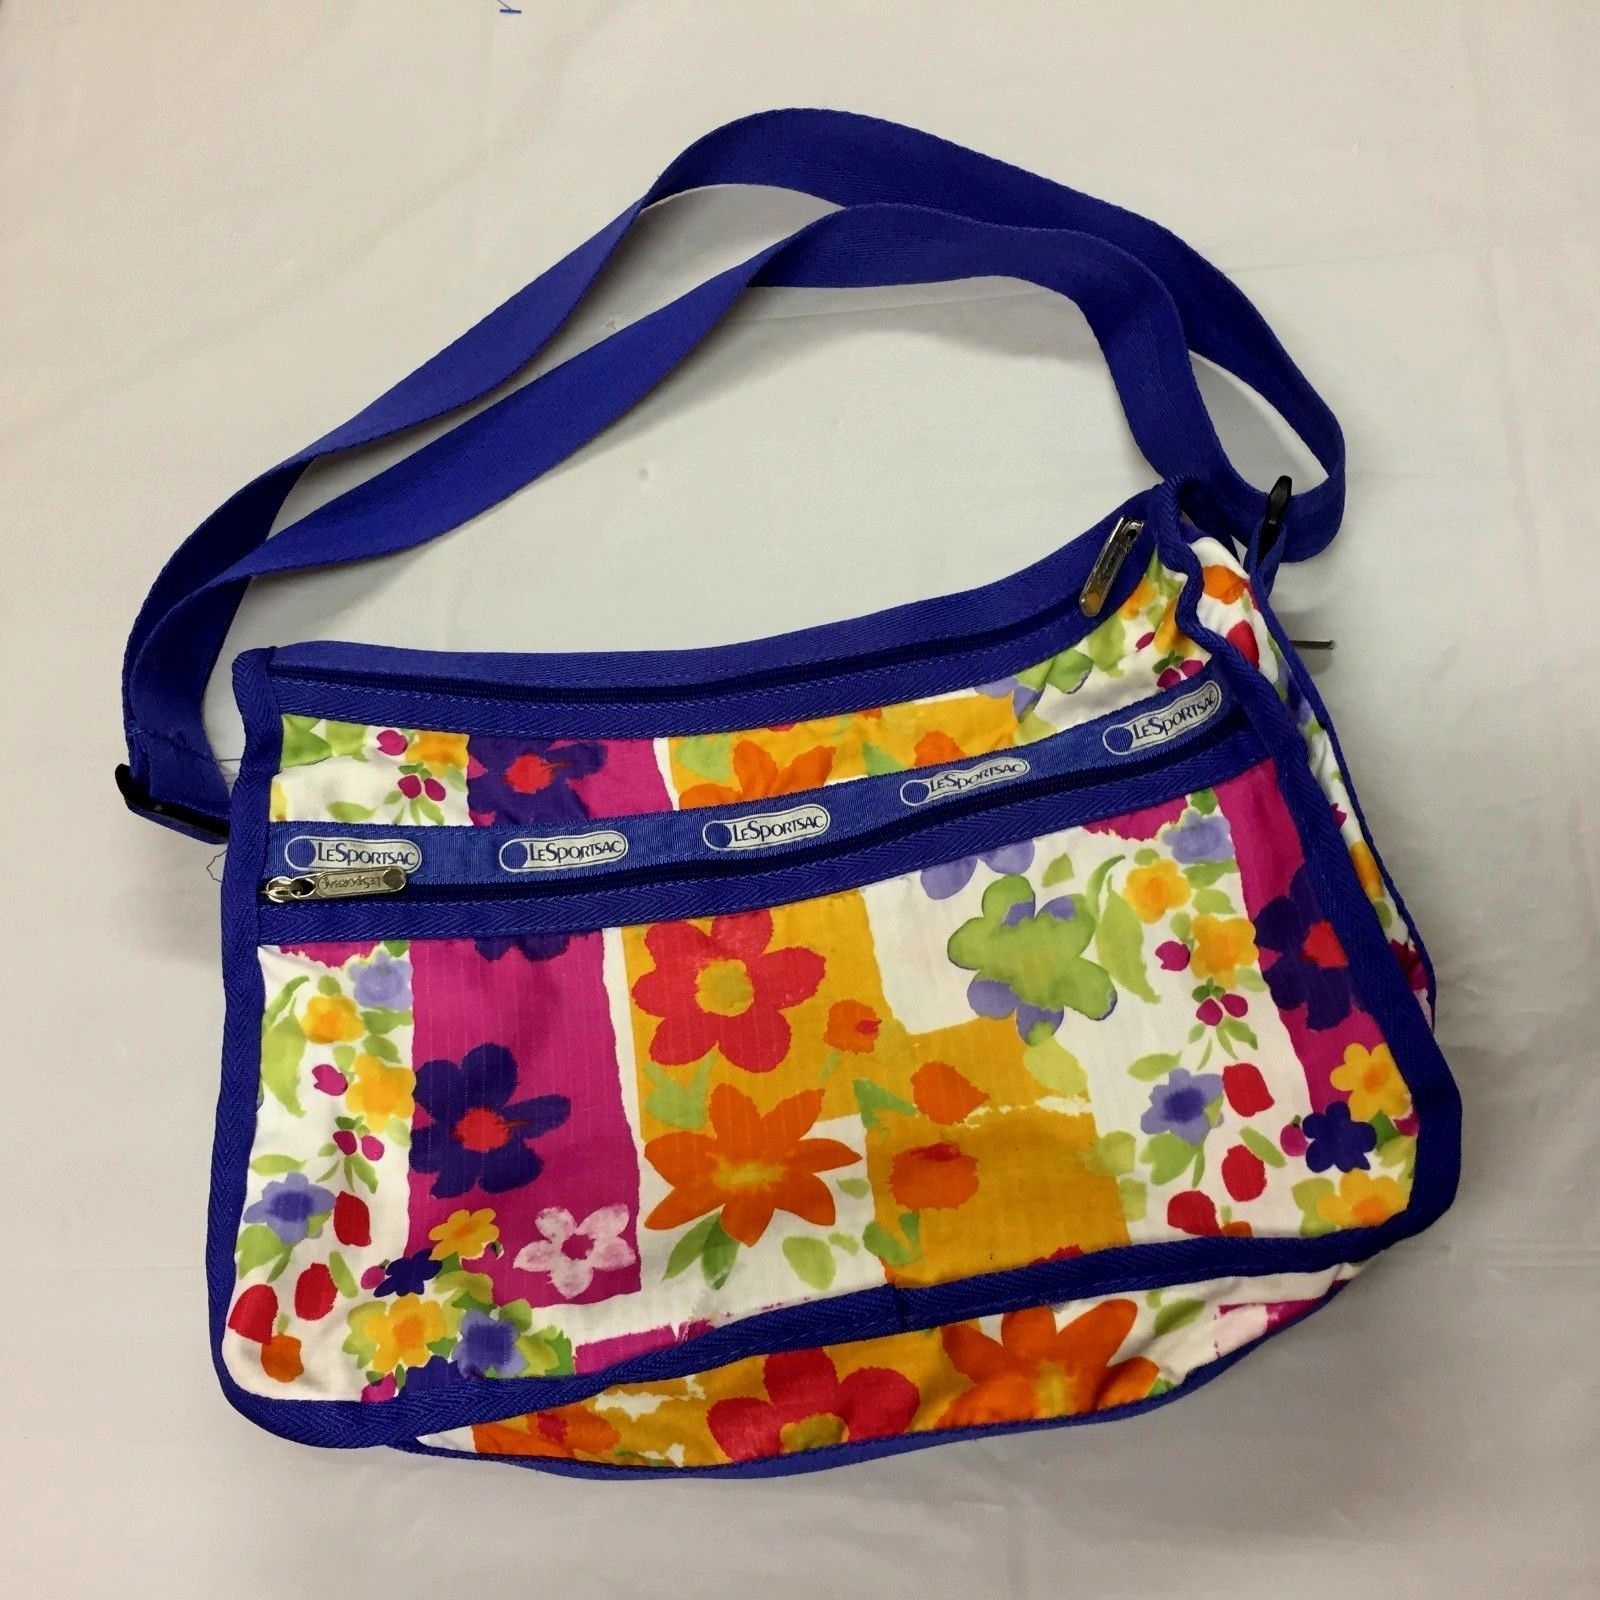 LESportSac Deluxe Everyday Crossbody Purse and 39 similar items